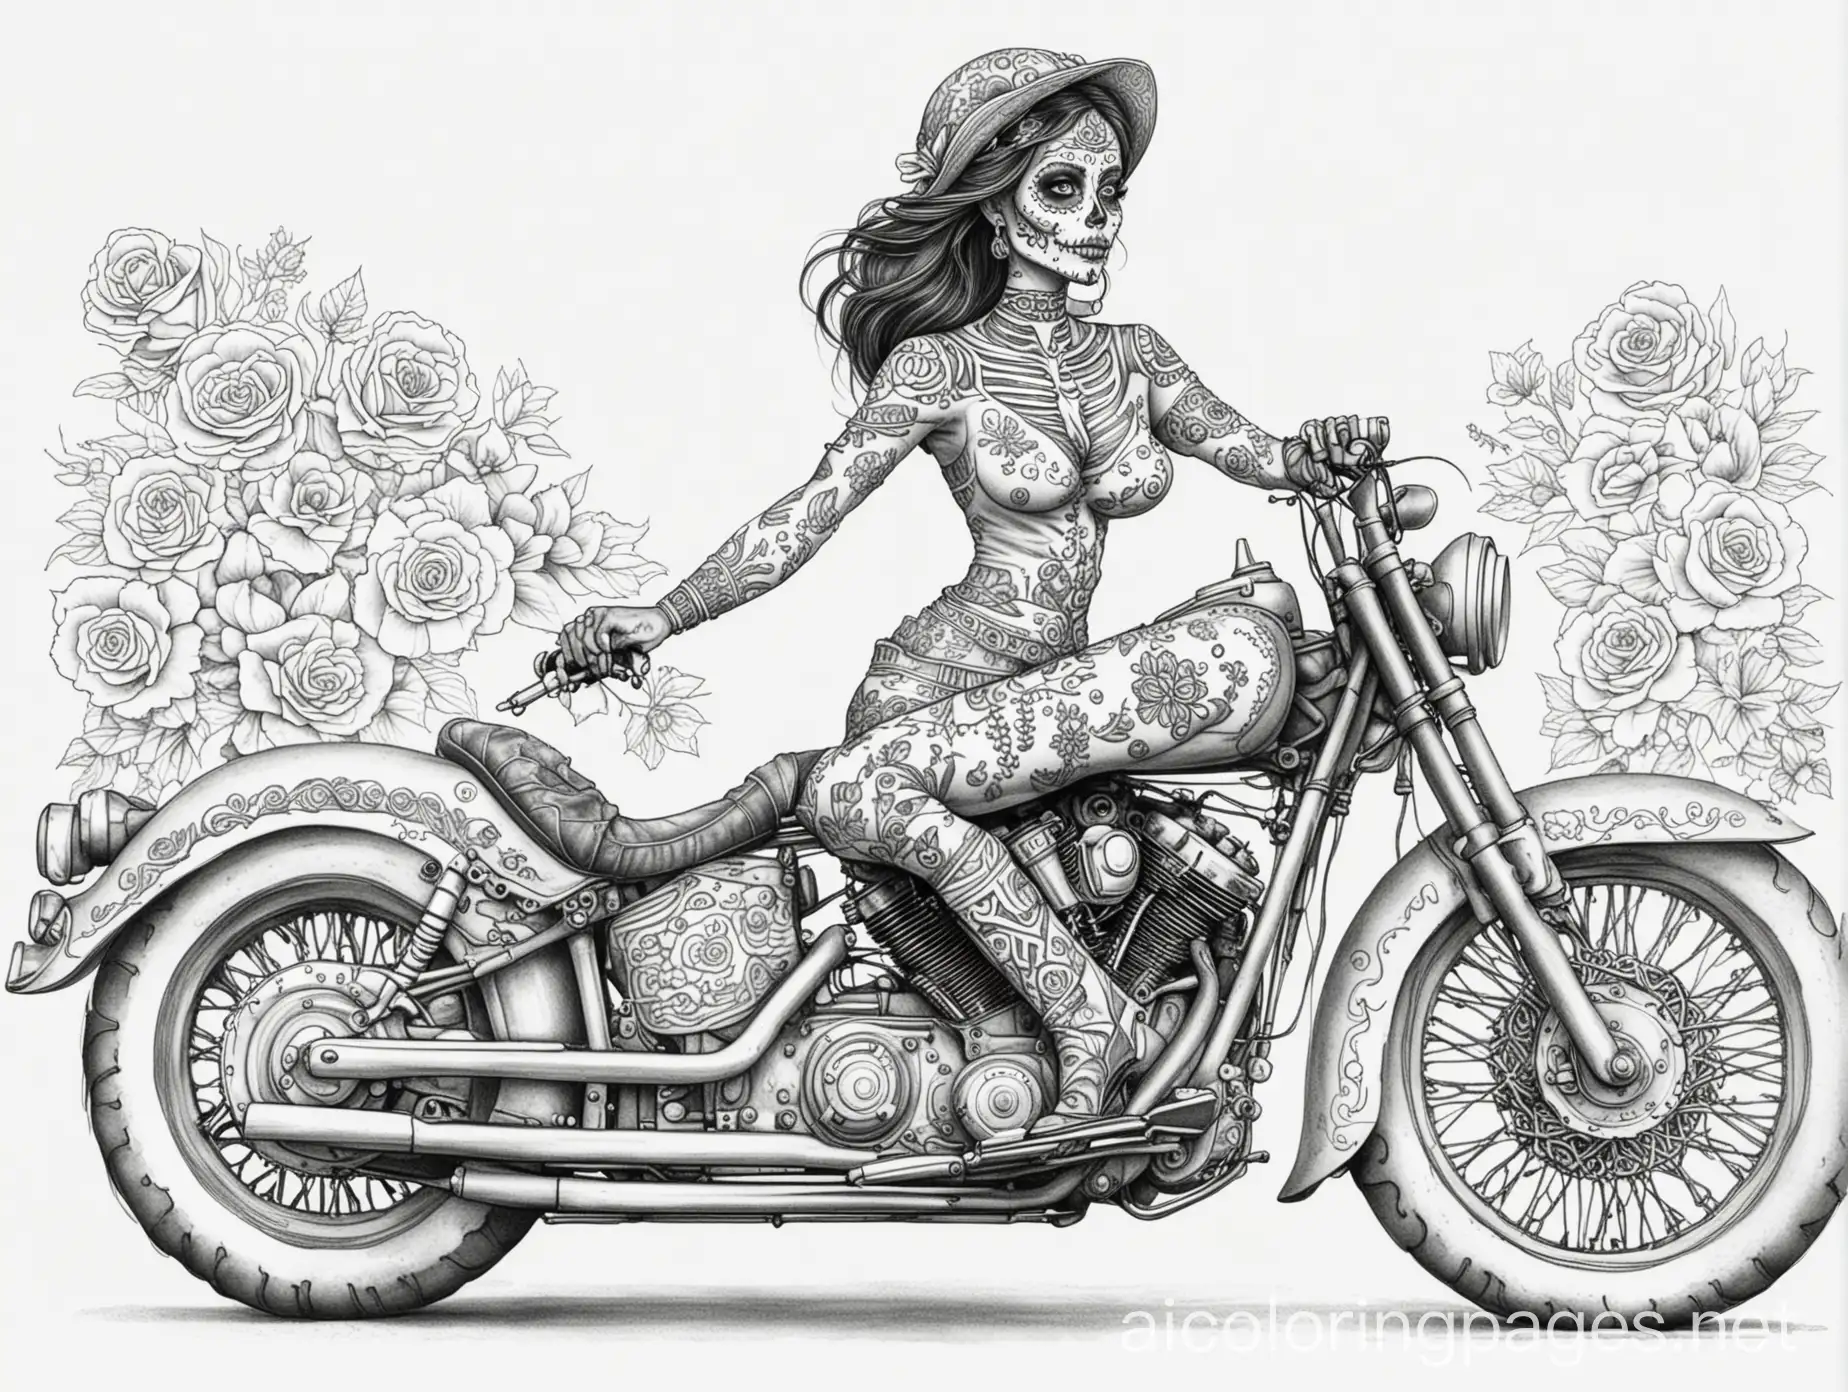 Day of the dead woman on a motorcycle , Coloring Page, black and white, line art, white background, Simplicity, Ample White Space. The background of the coloring page is plain white to make it easy for young children to color within the lines. The outlines of all the subjects are easy to distinguish, making it simple for kids to color without too much difficulty